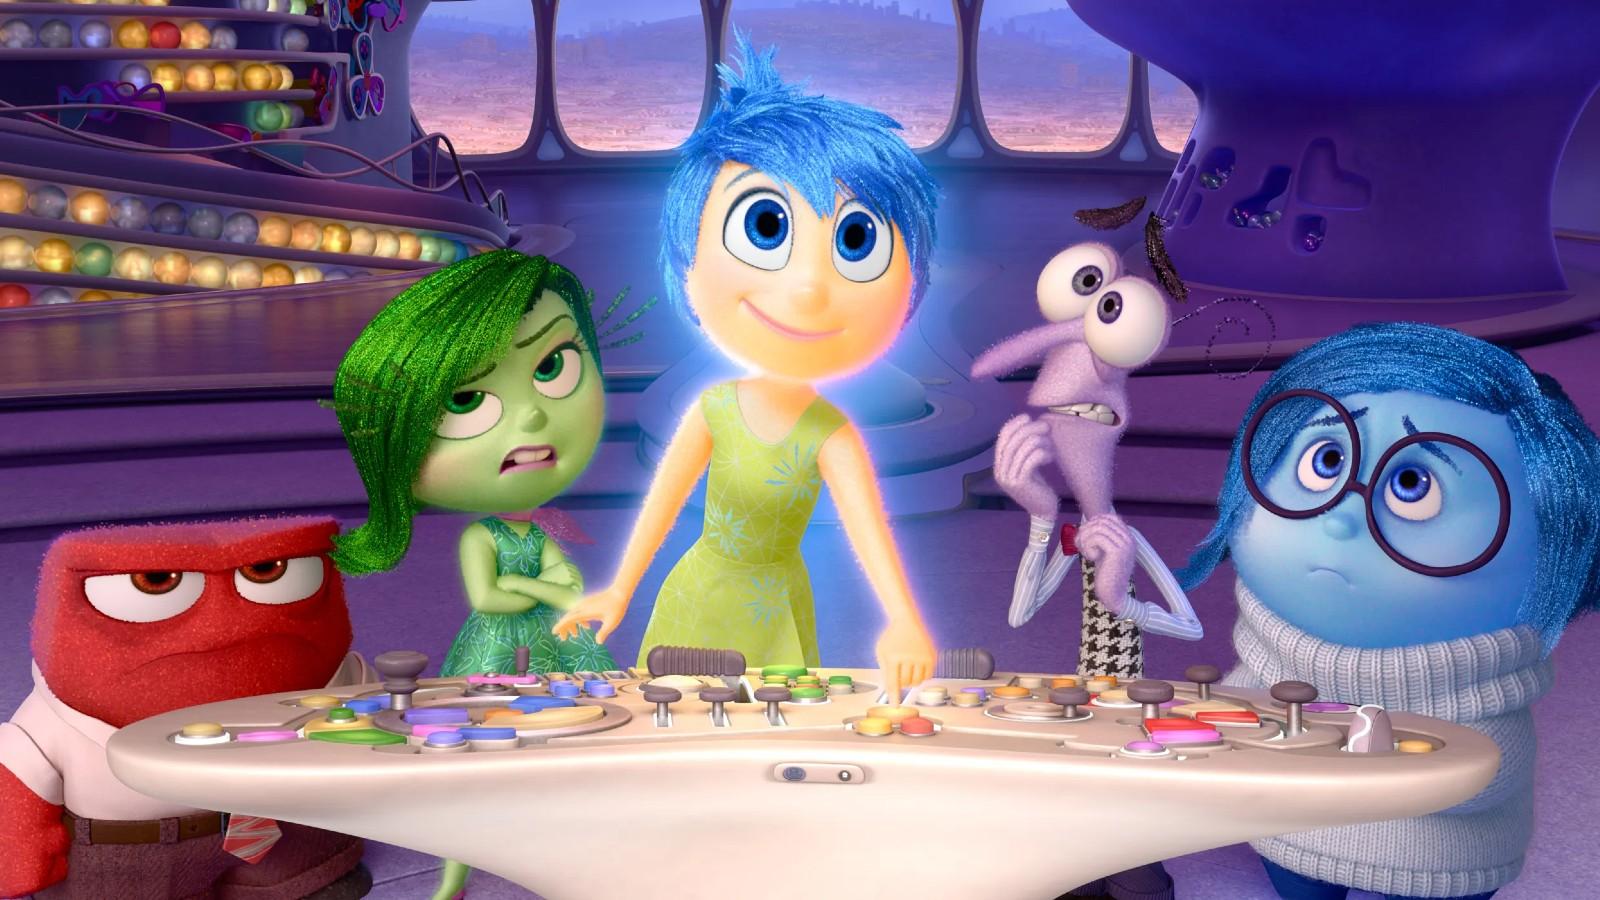 A still from Inside Out